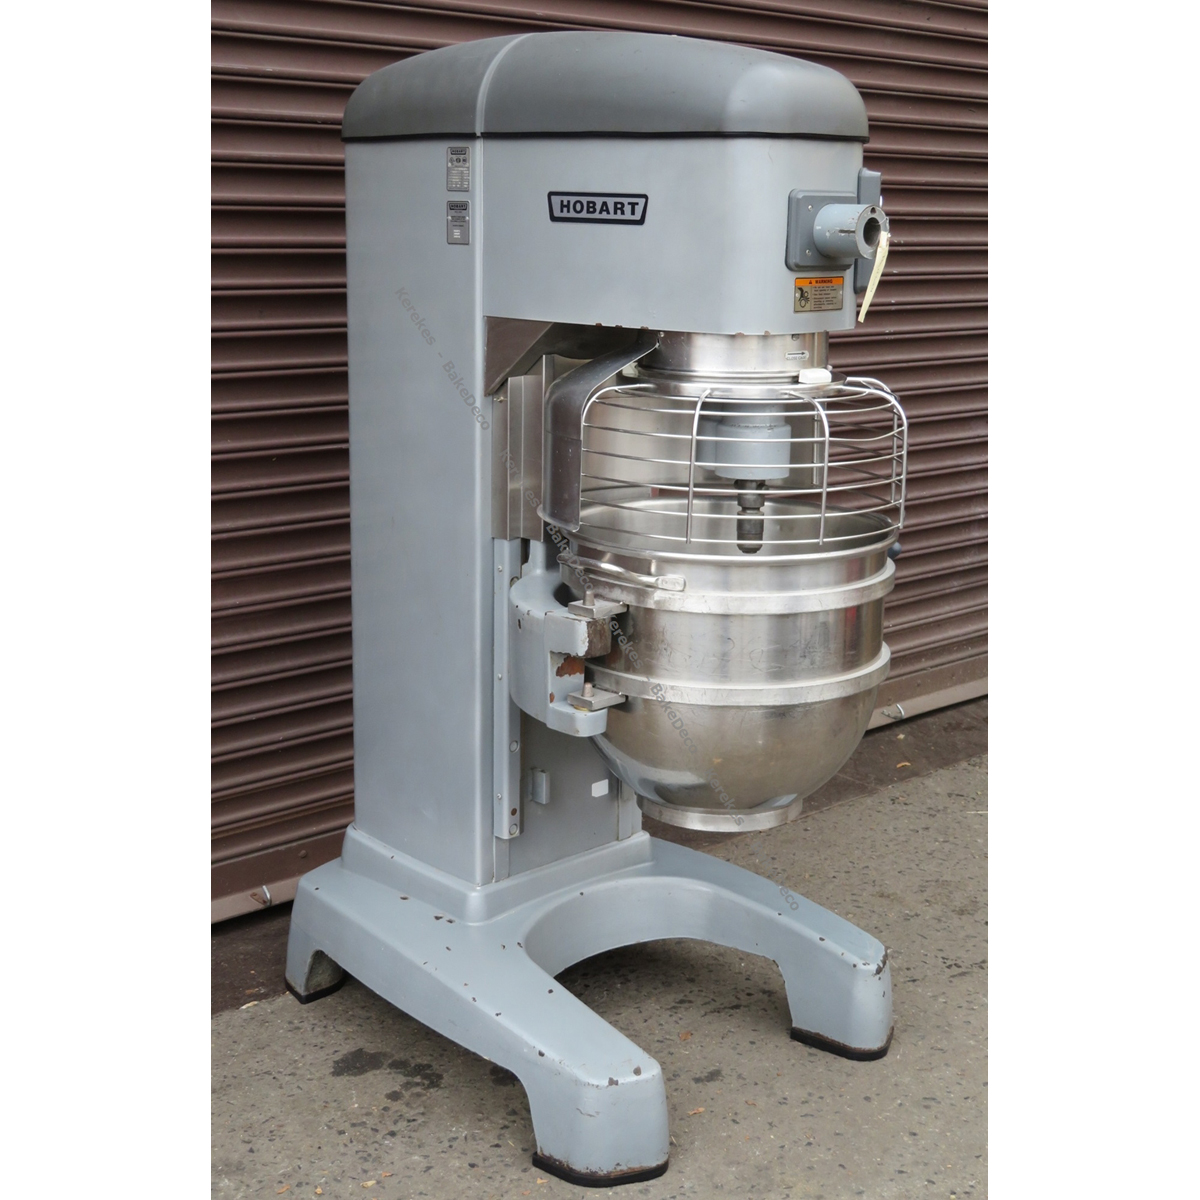 Hobart 60 Quart HL600 Legacy Mixer with Bowl Guard, Used Great Condition image 1